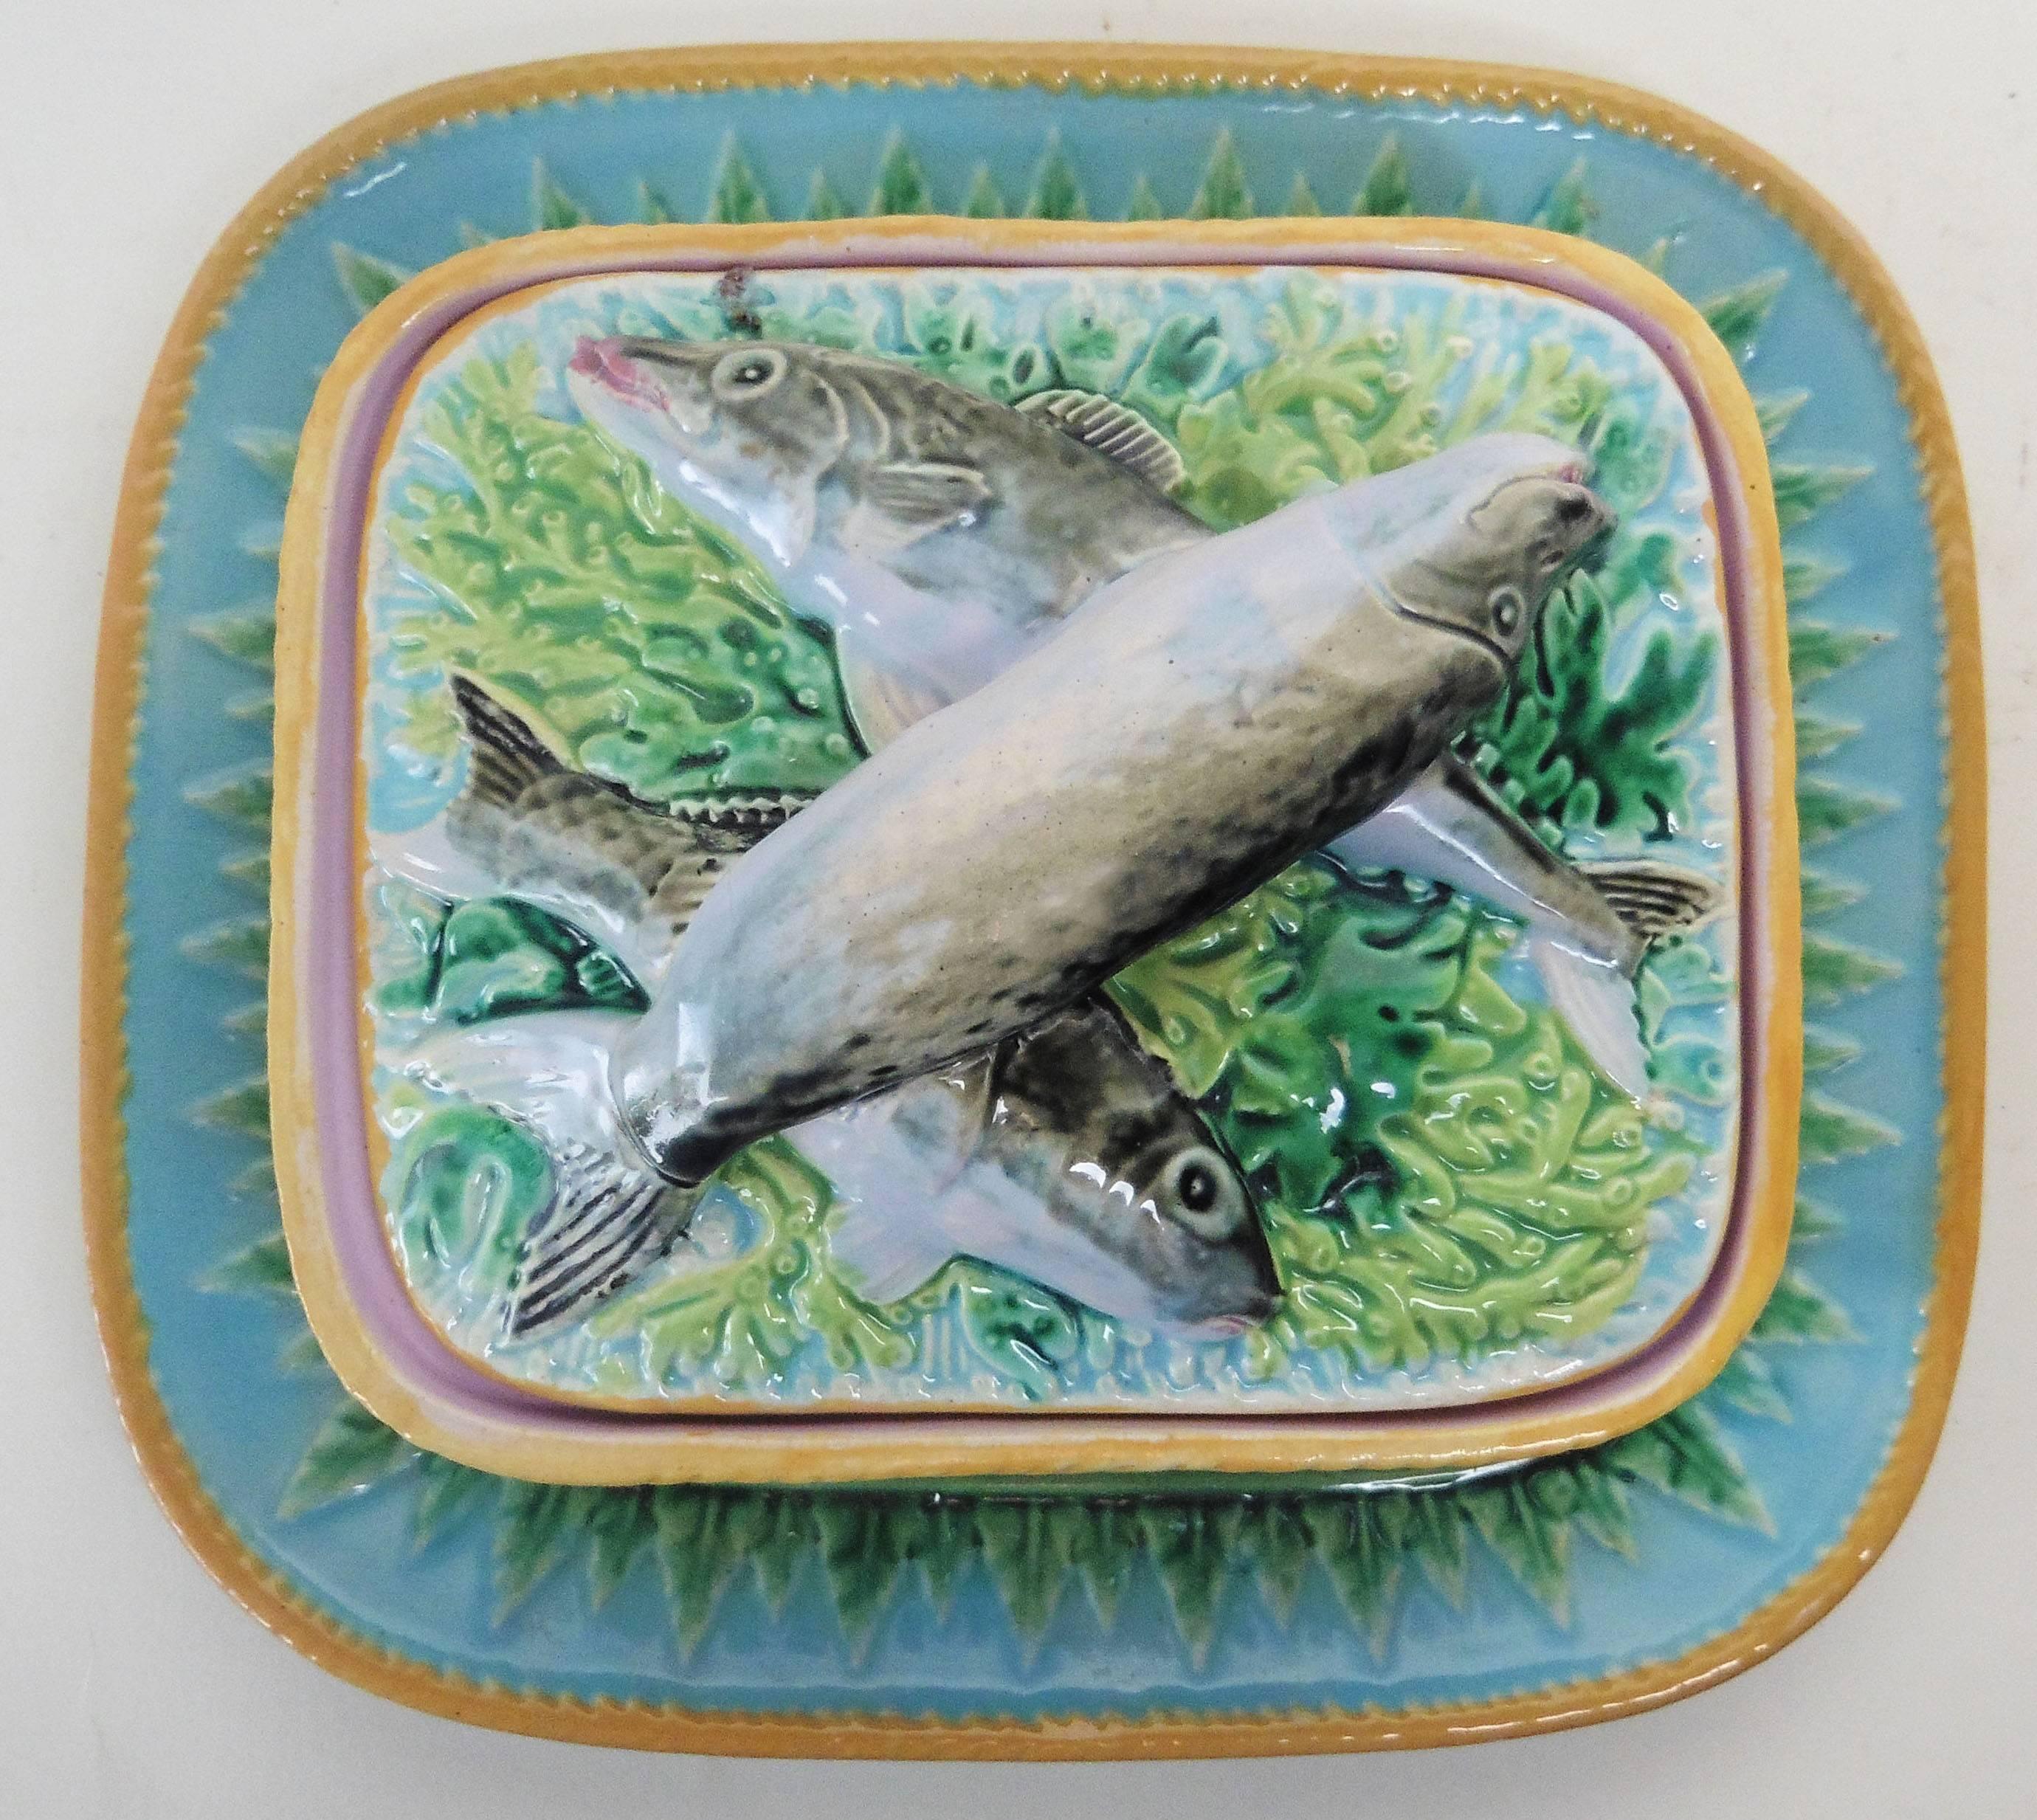 Complete colorful turquoise Victorian Majolica sardine box with the underplate signed George Jones dated around 1875 with the crescent mark.
Reference / Page 96 